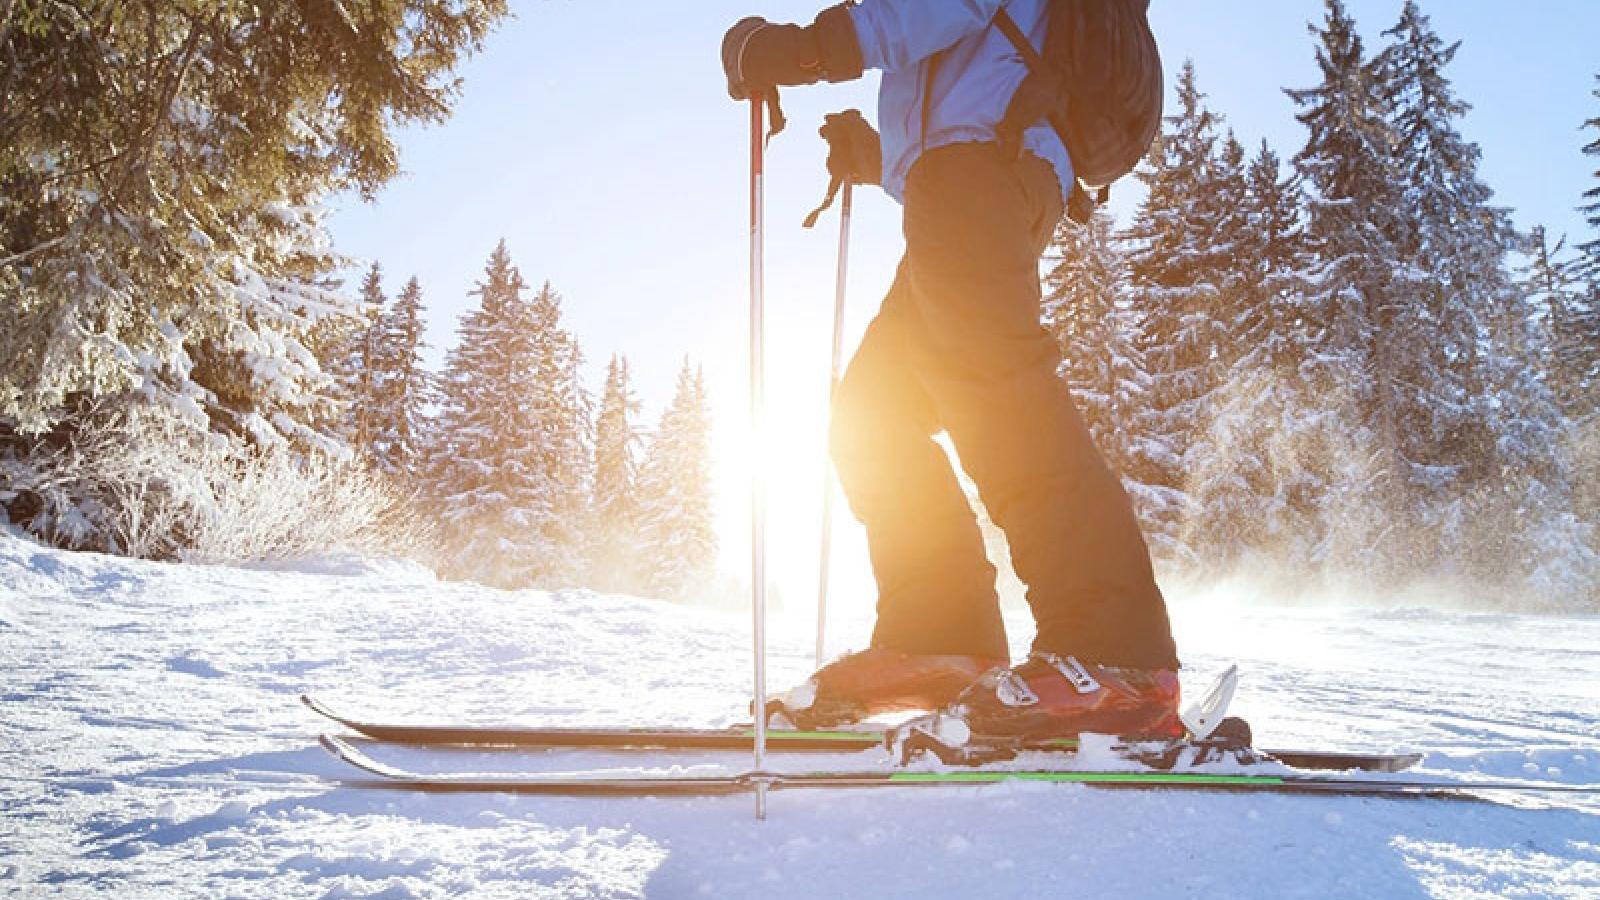 How to Prevent Winter Sports Injuries